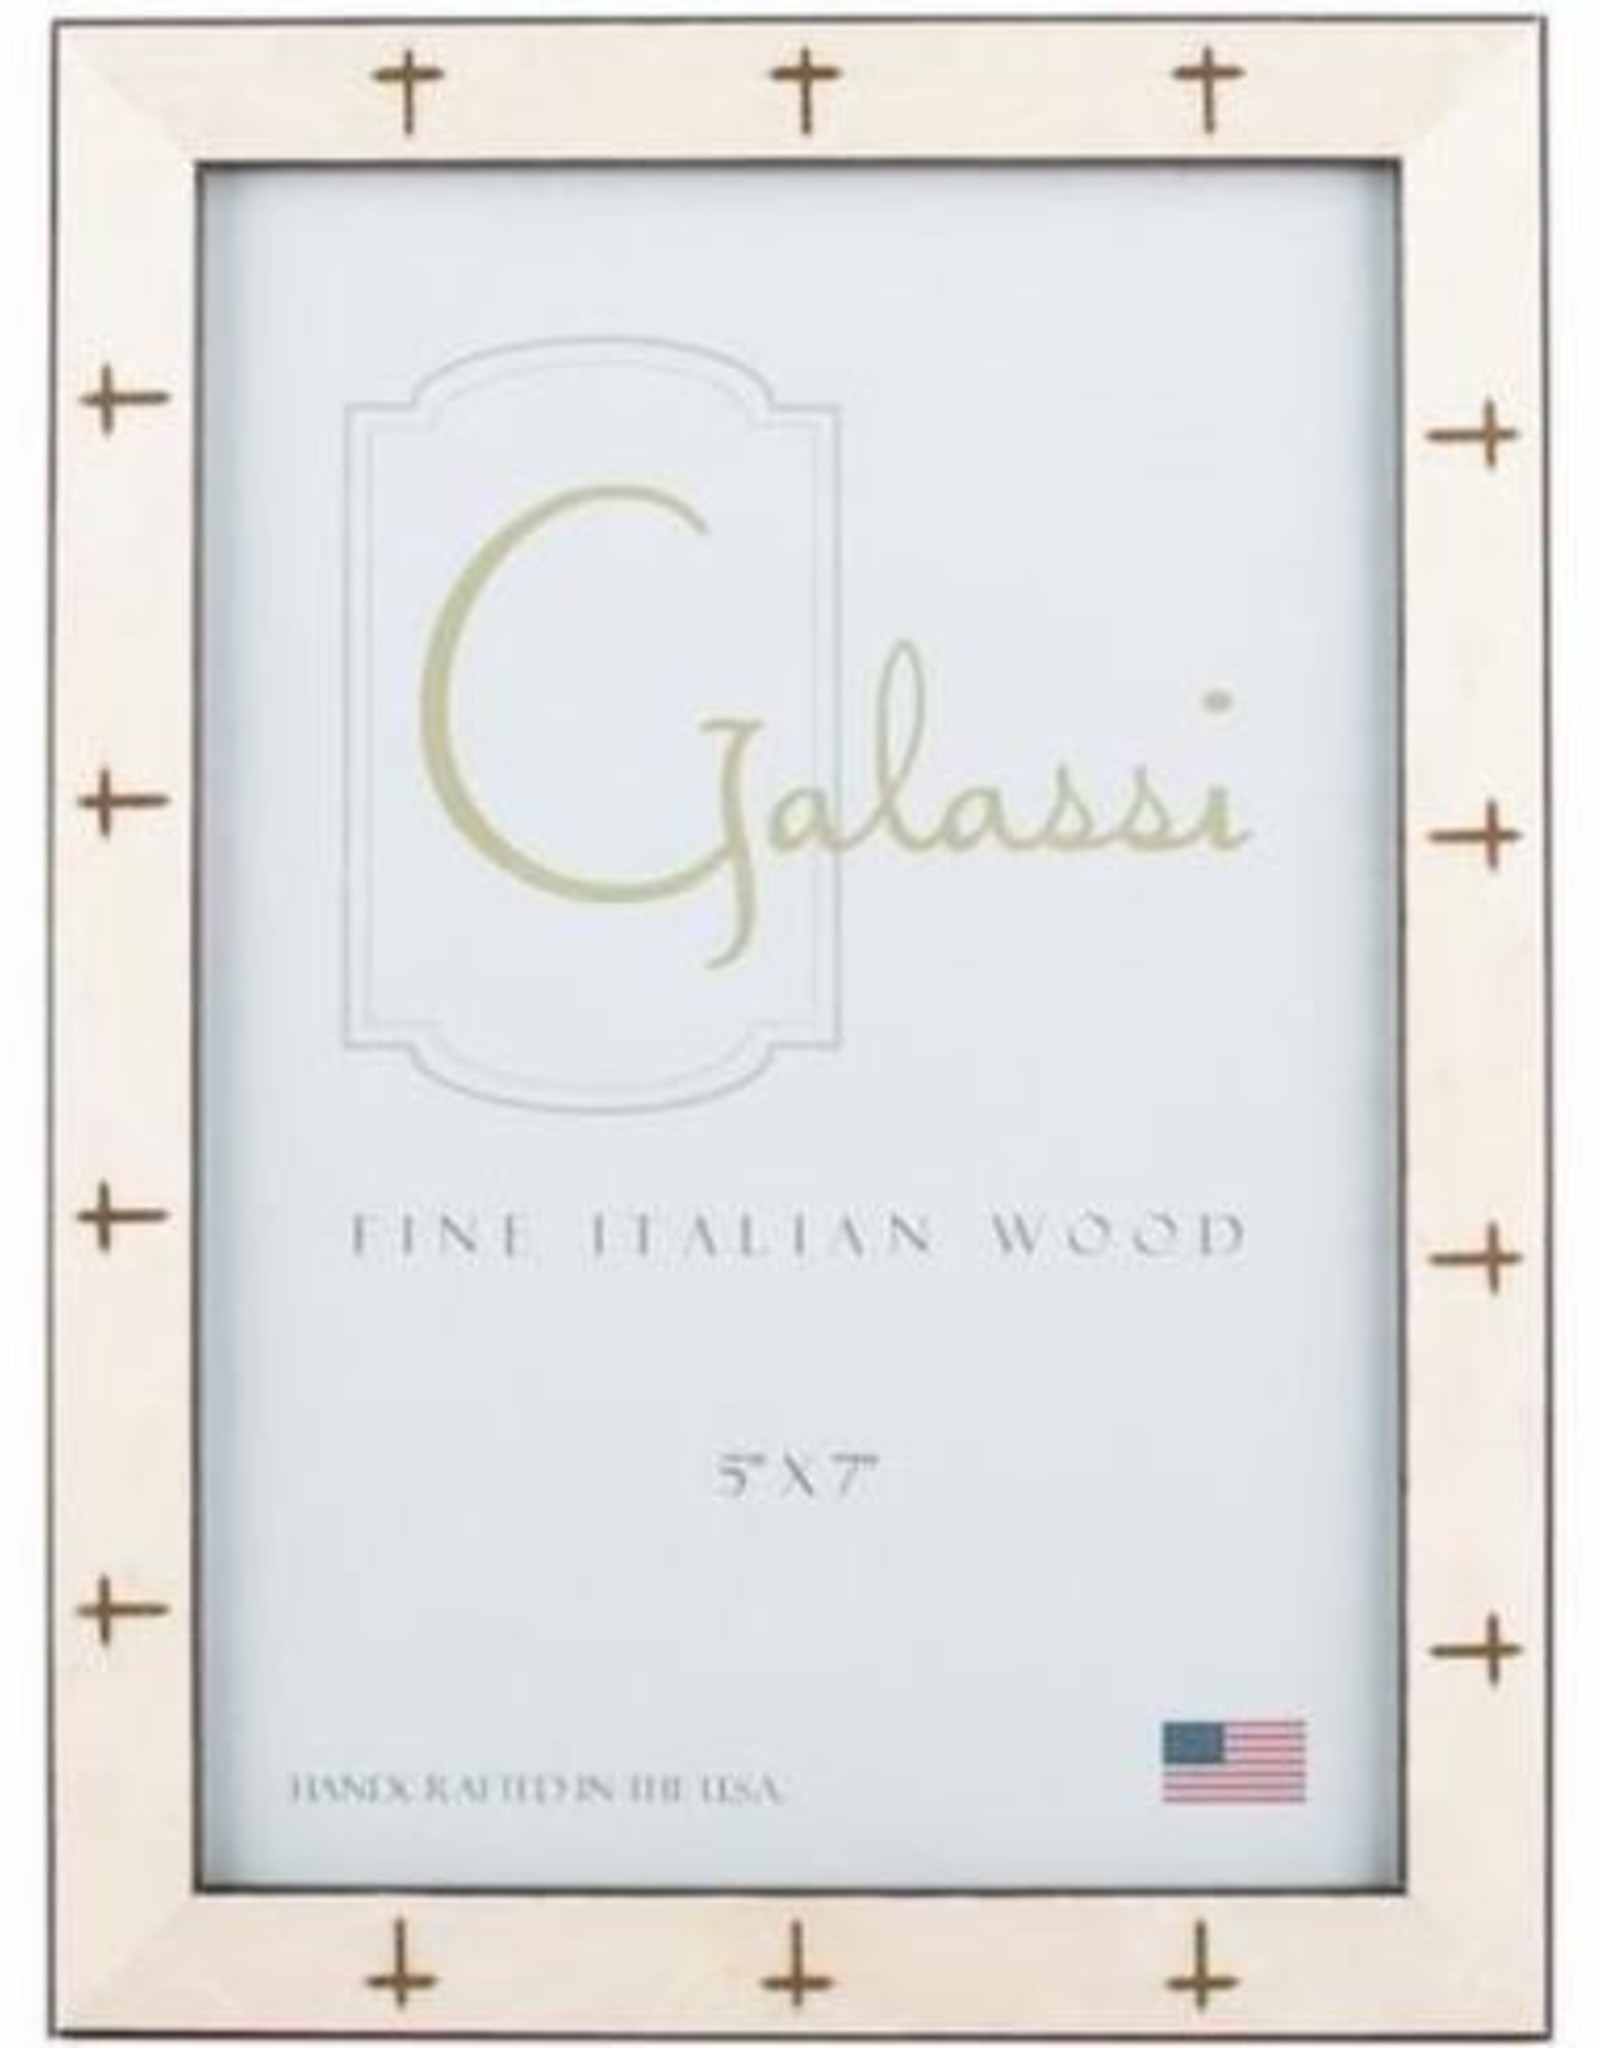 Galassi White Frame With Gold Crosses